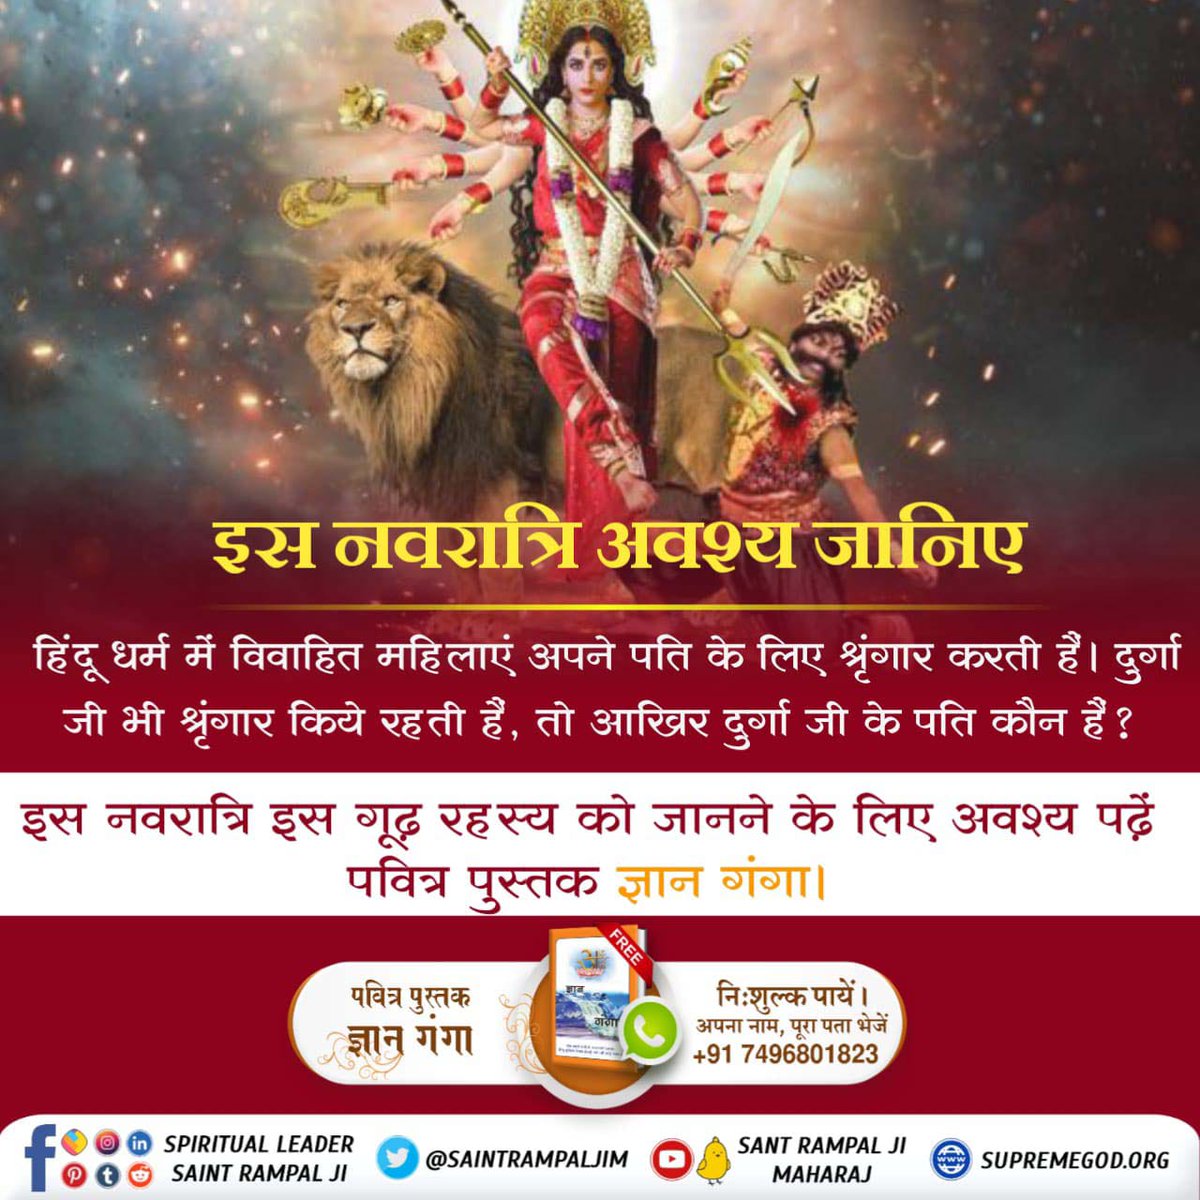 #fridaydayMotivation
After all, whose name does Maa Durga adorn, whose name she puts on vermilion, what the Vedas and religious texts say.
 To know must read the holy book 'Gyan Ganga'.